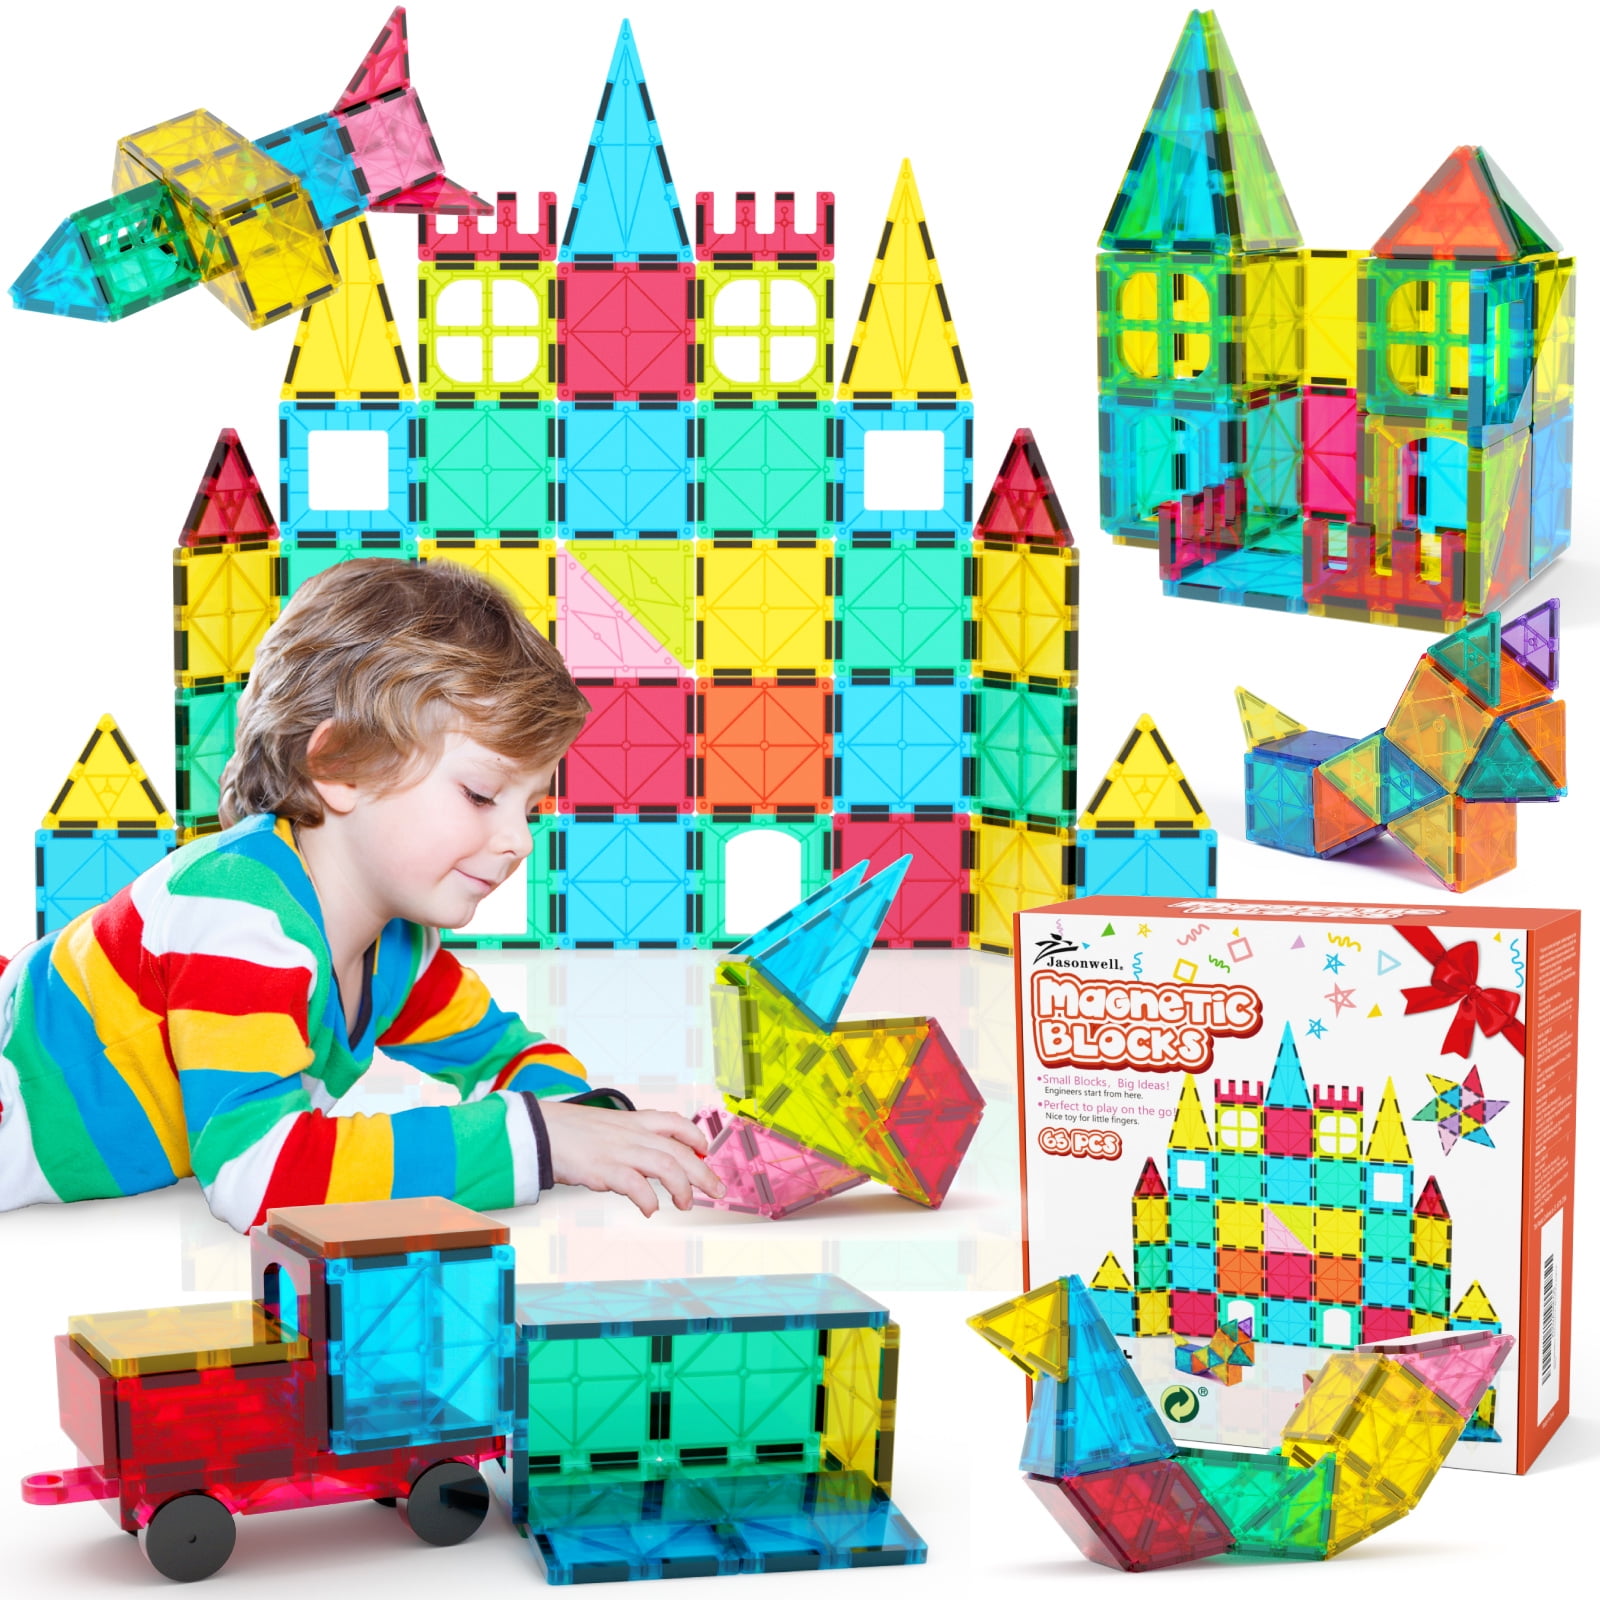 Details about   Magnetic Tiles Magnetic Blocks Building Toys  Kids 84 PCS-NEW & FREE SHIPPING 